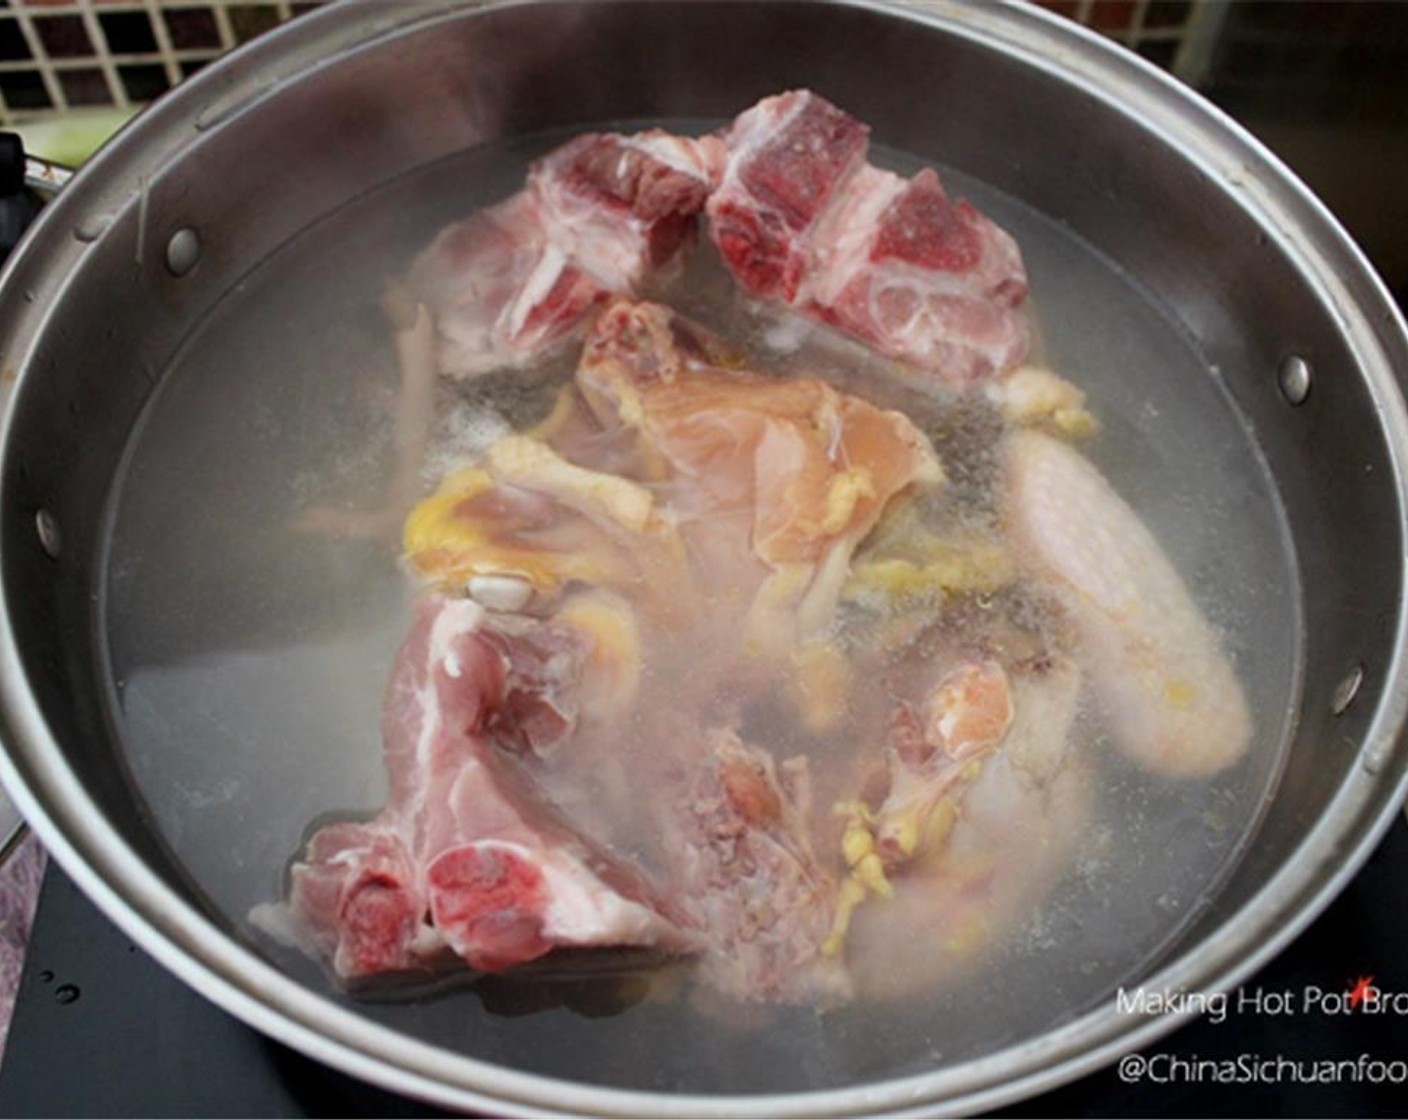 step 1 Cut Chicken (1 lb) into chunks. Clean the chicken and Pig Bones (2 pieces). Boil a large pot of water. Add chicken and pig bones. When the blood surfaces to the top of the soup, strain out the meat. Cut the chicken into small pieces.